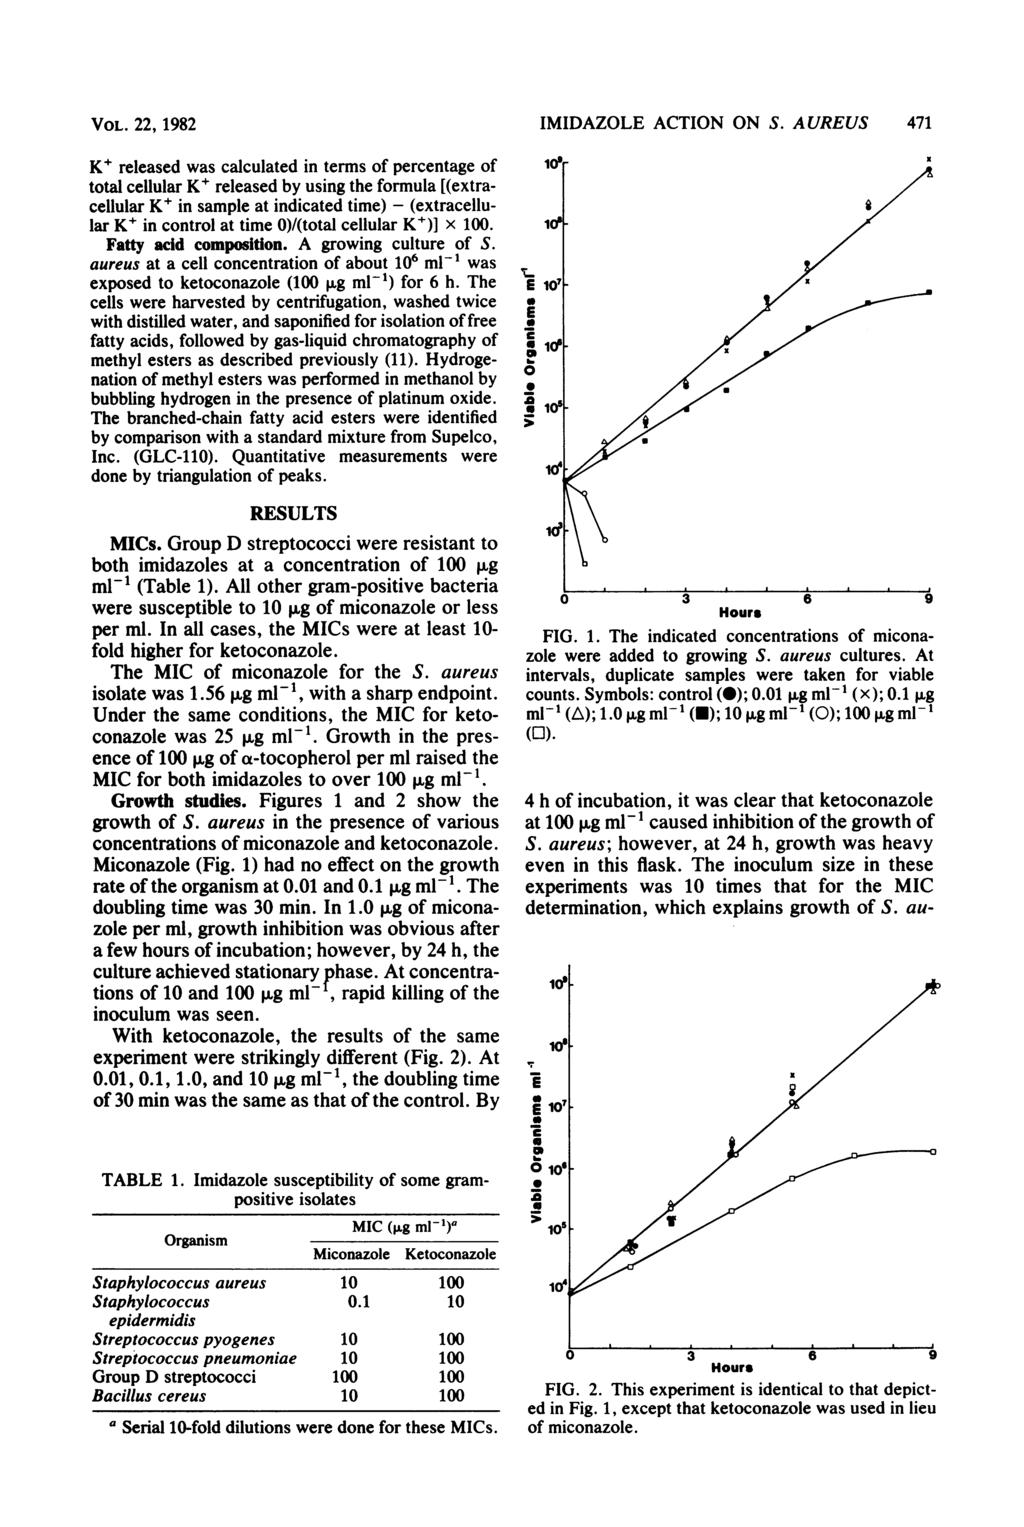 VOL. 22, 1982 K+ released was calculated in terms of percentage of total cellular K+ released by using the formula [(extracellular K+ in sample at indicated time) - (extracellular K+ in control at